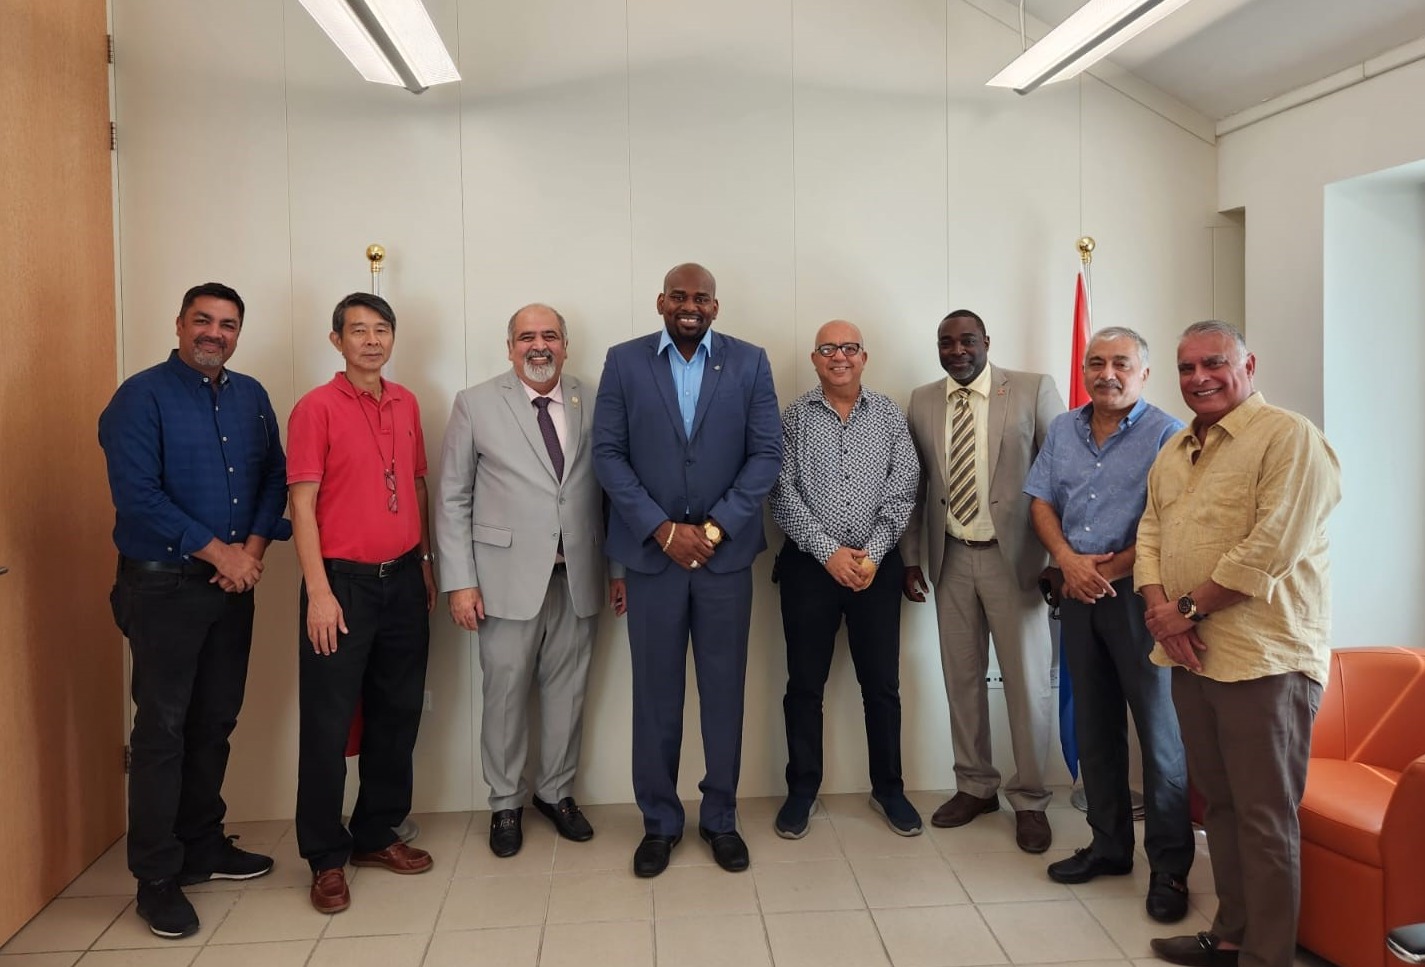 Minister Ottley meets with Wholesalers to discuss lower food cost St. Maarten